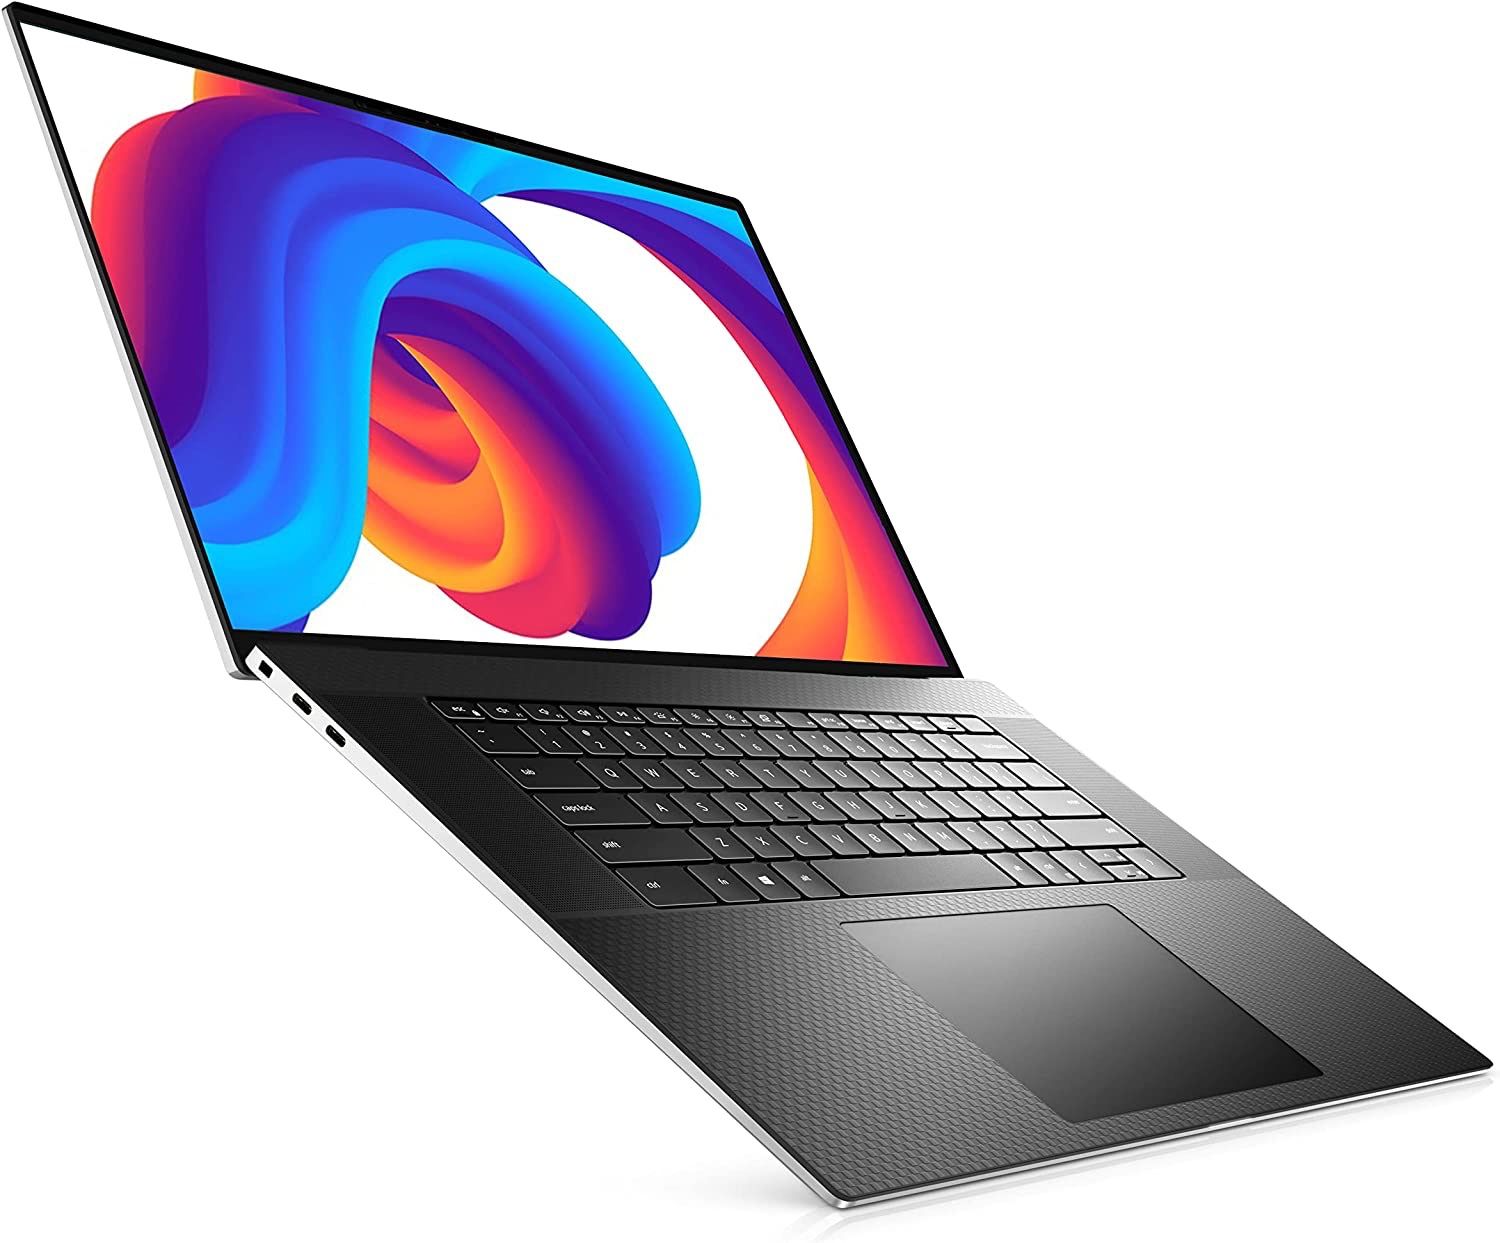 The Dell XPS 17 folded flat with color display